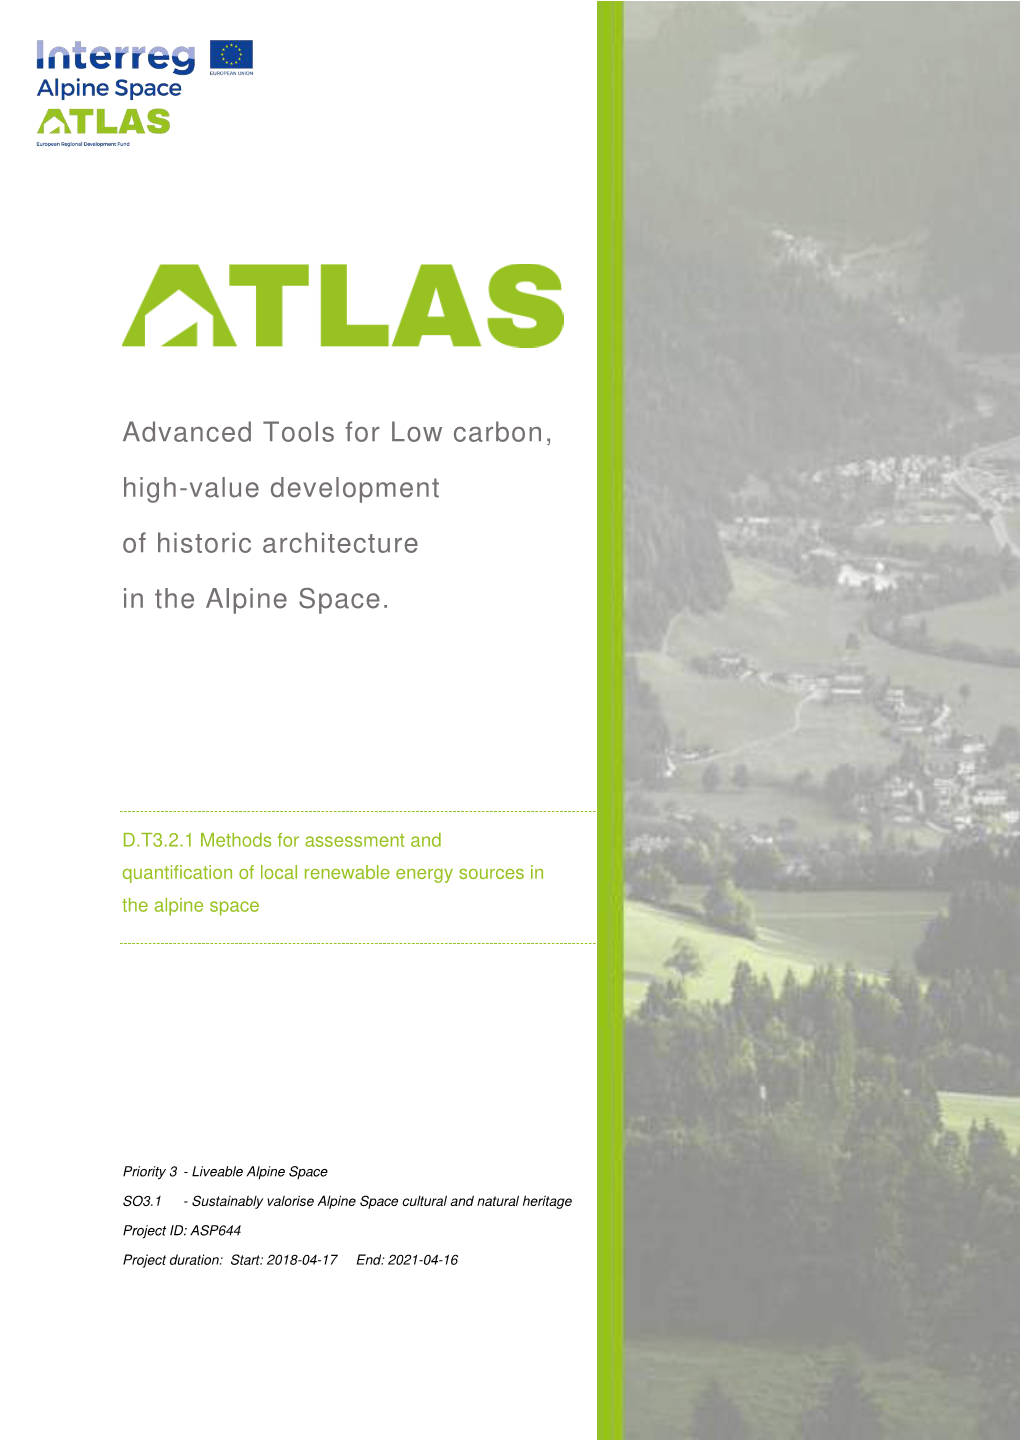 Advanced Tools for Low Carbon, High-Value Development of Historic Architecture in the Alpine Space